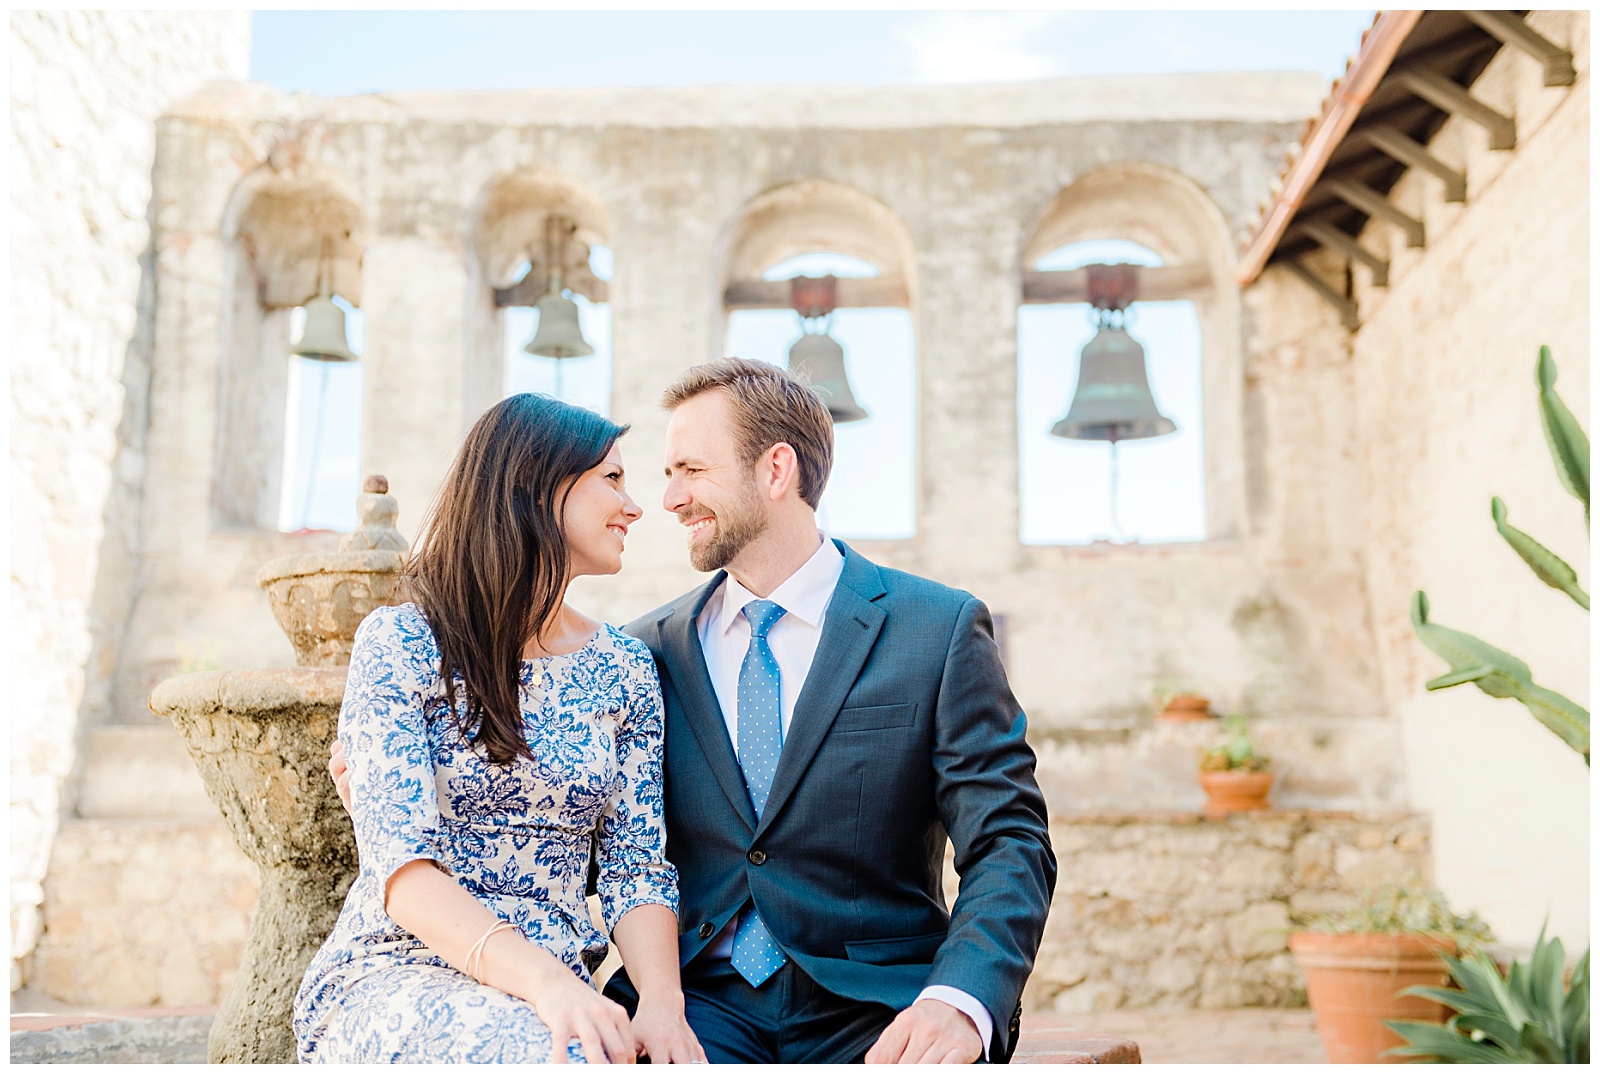 San Juan Capistrano Mission Engagement Session. Photography by Mollie Jane Photography. To see more go to ww.molliejanephotography.com.